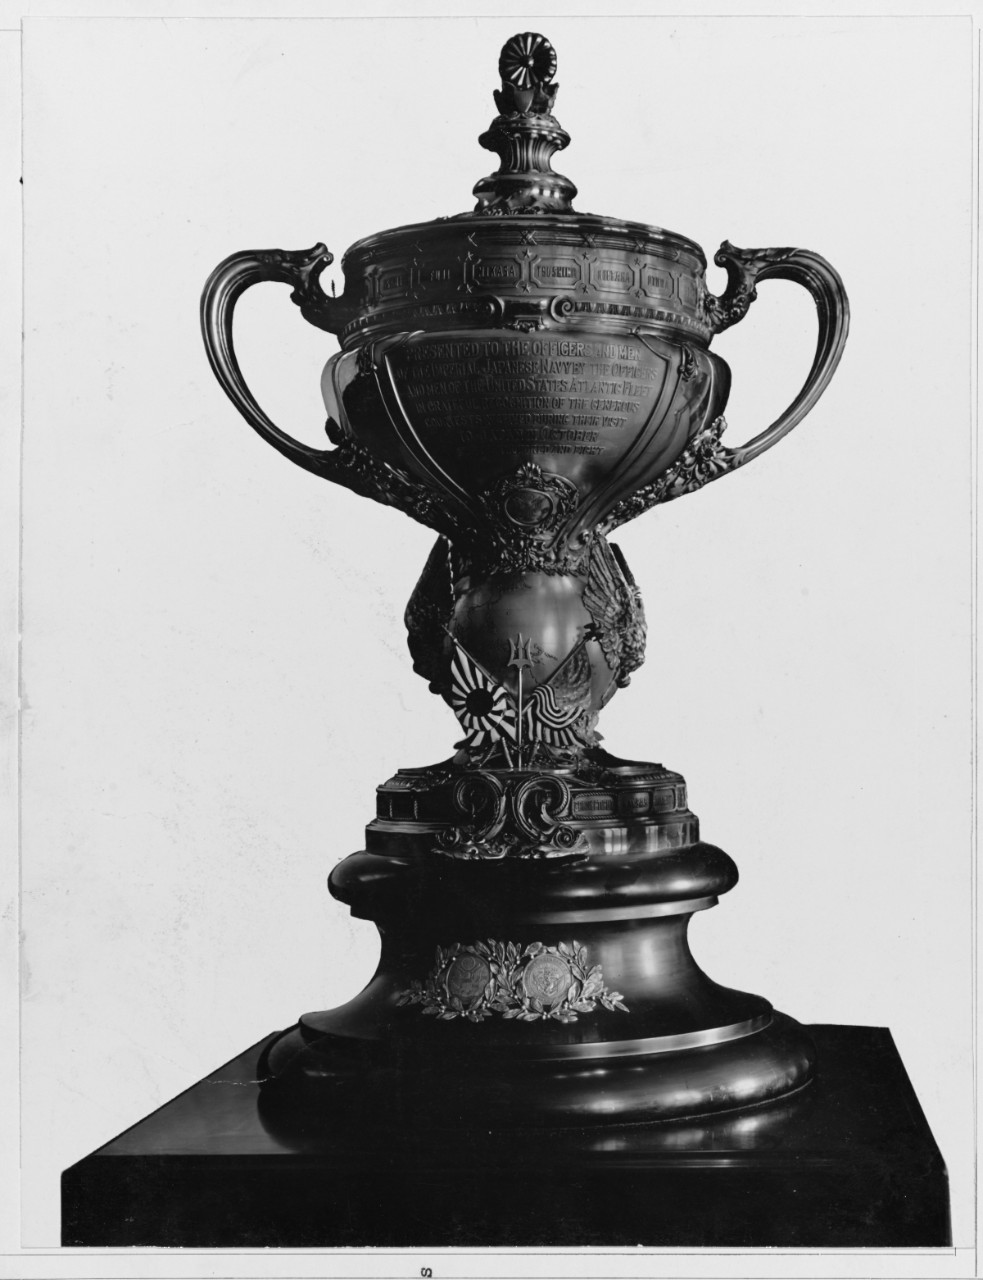 Photo #: NH 41679  Loving Cup Presented to the Officers and Men of the Imperial Japanese Navy